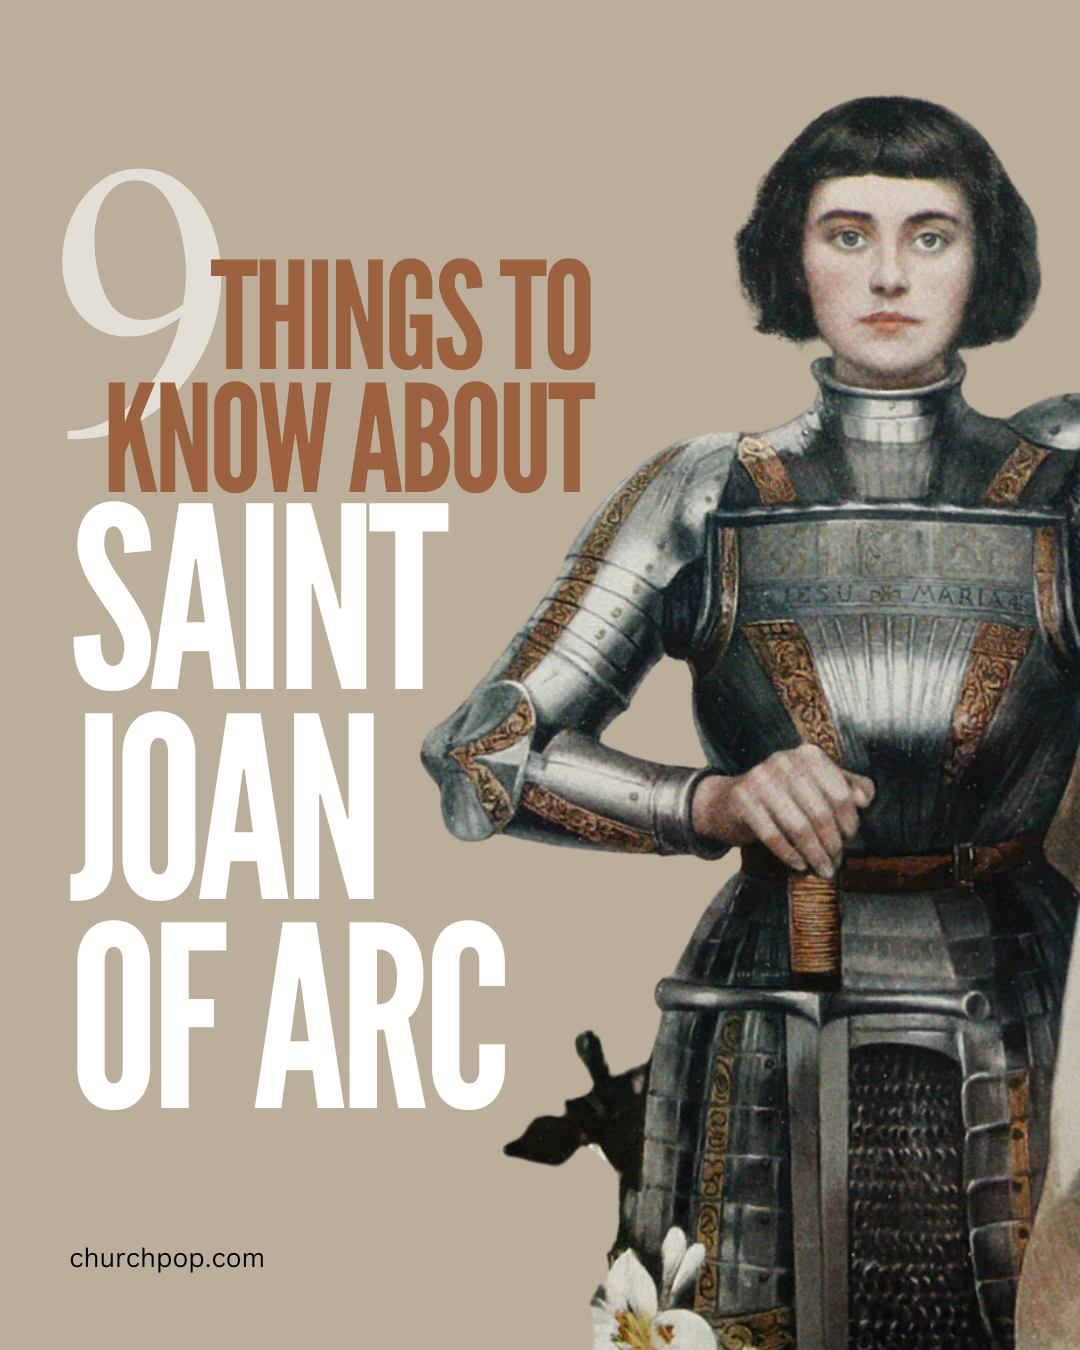 St. Joan of Arc - A Catholic Heroine: 9 Things to Know & Share